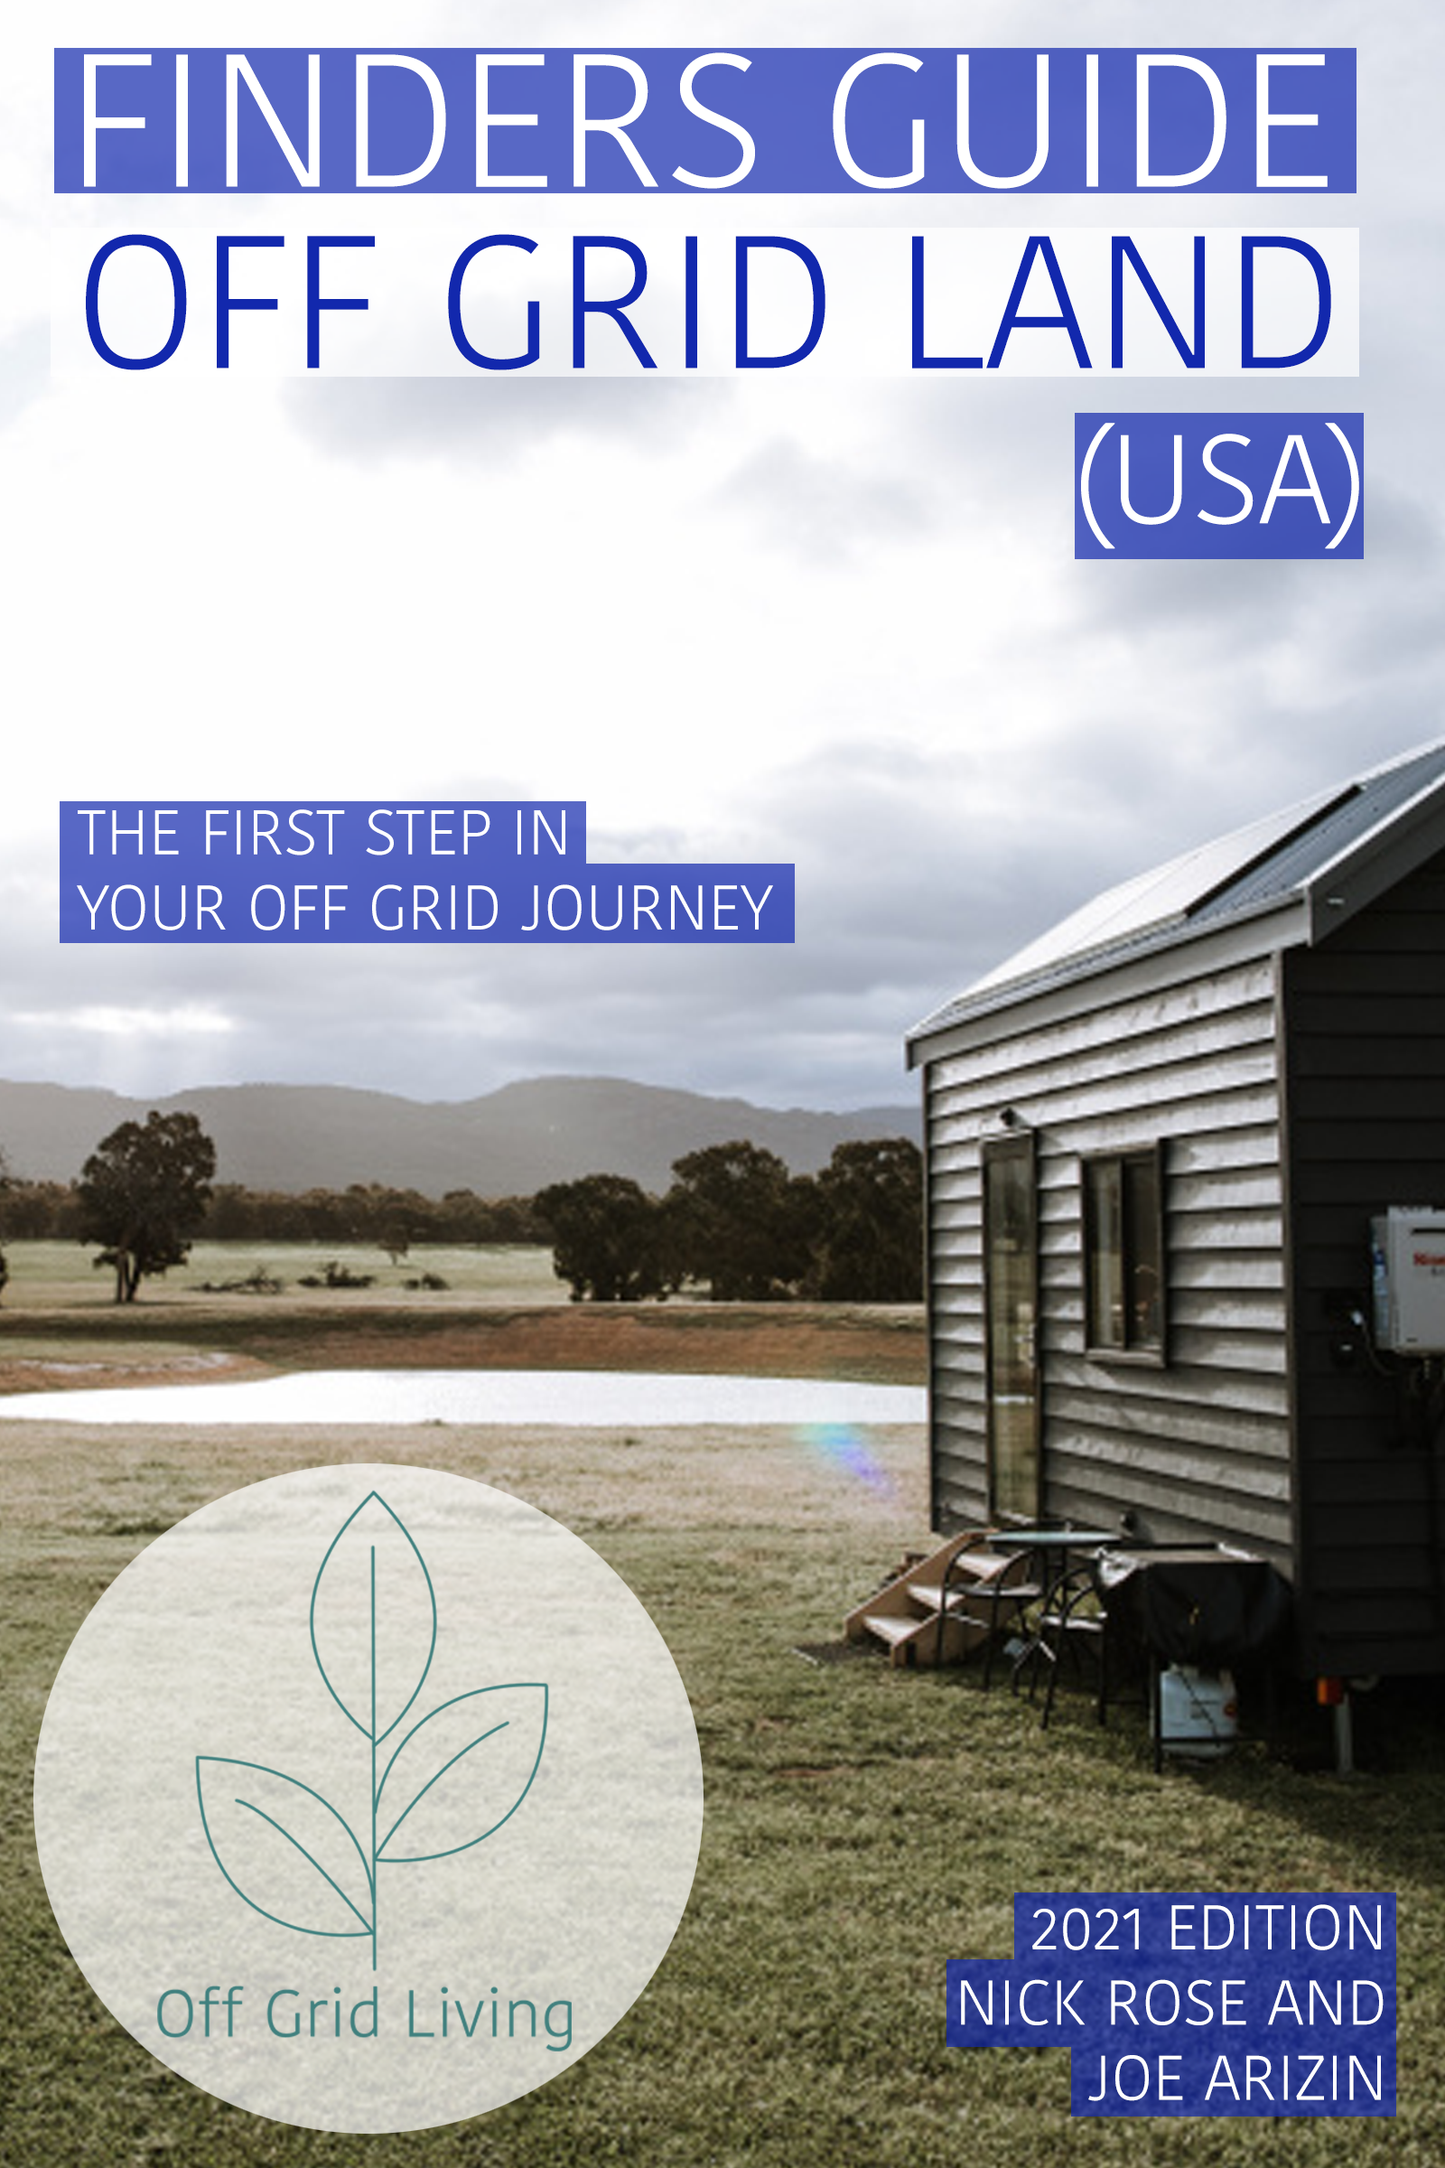 Finder's Guide - Off Grid Land (USA) 2023 ed - Off Grid Living for Beginners